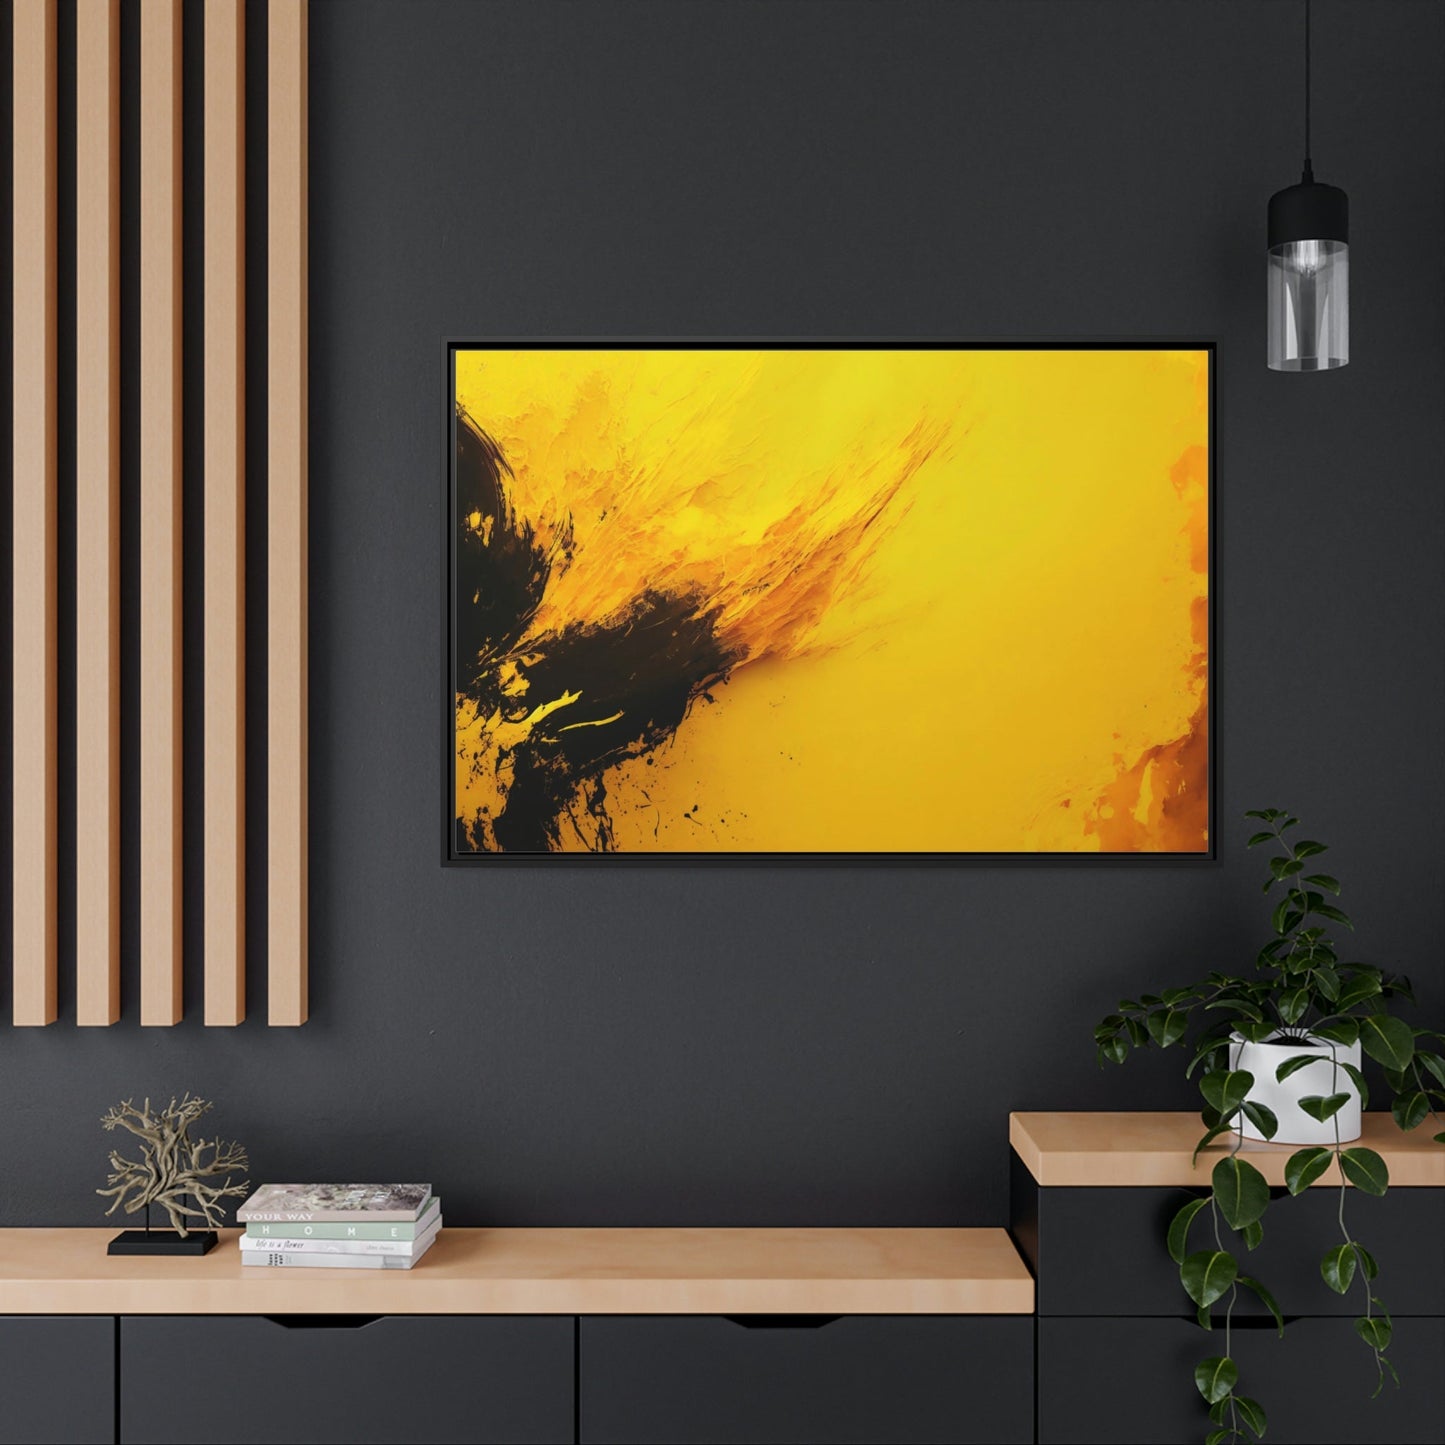 Sunny Abstraction: Bright and Playful Wall Art Prints Featuring a Yellow Abstract Design on Framed Canvas & Poster